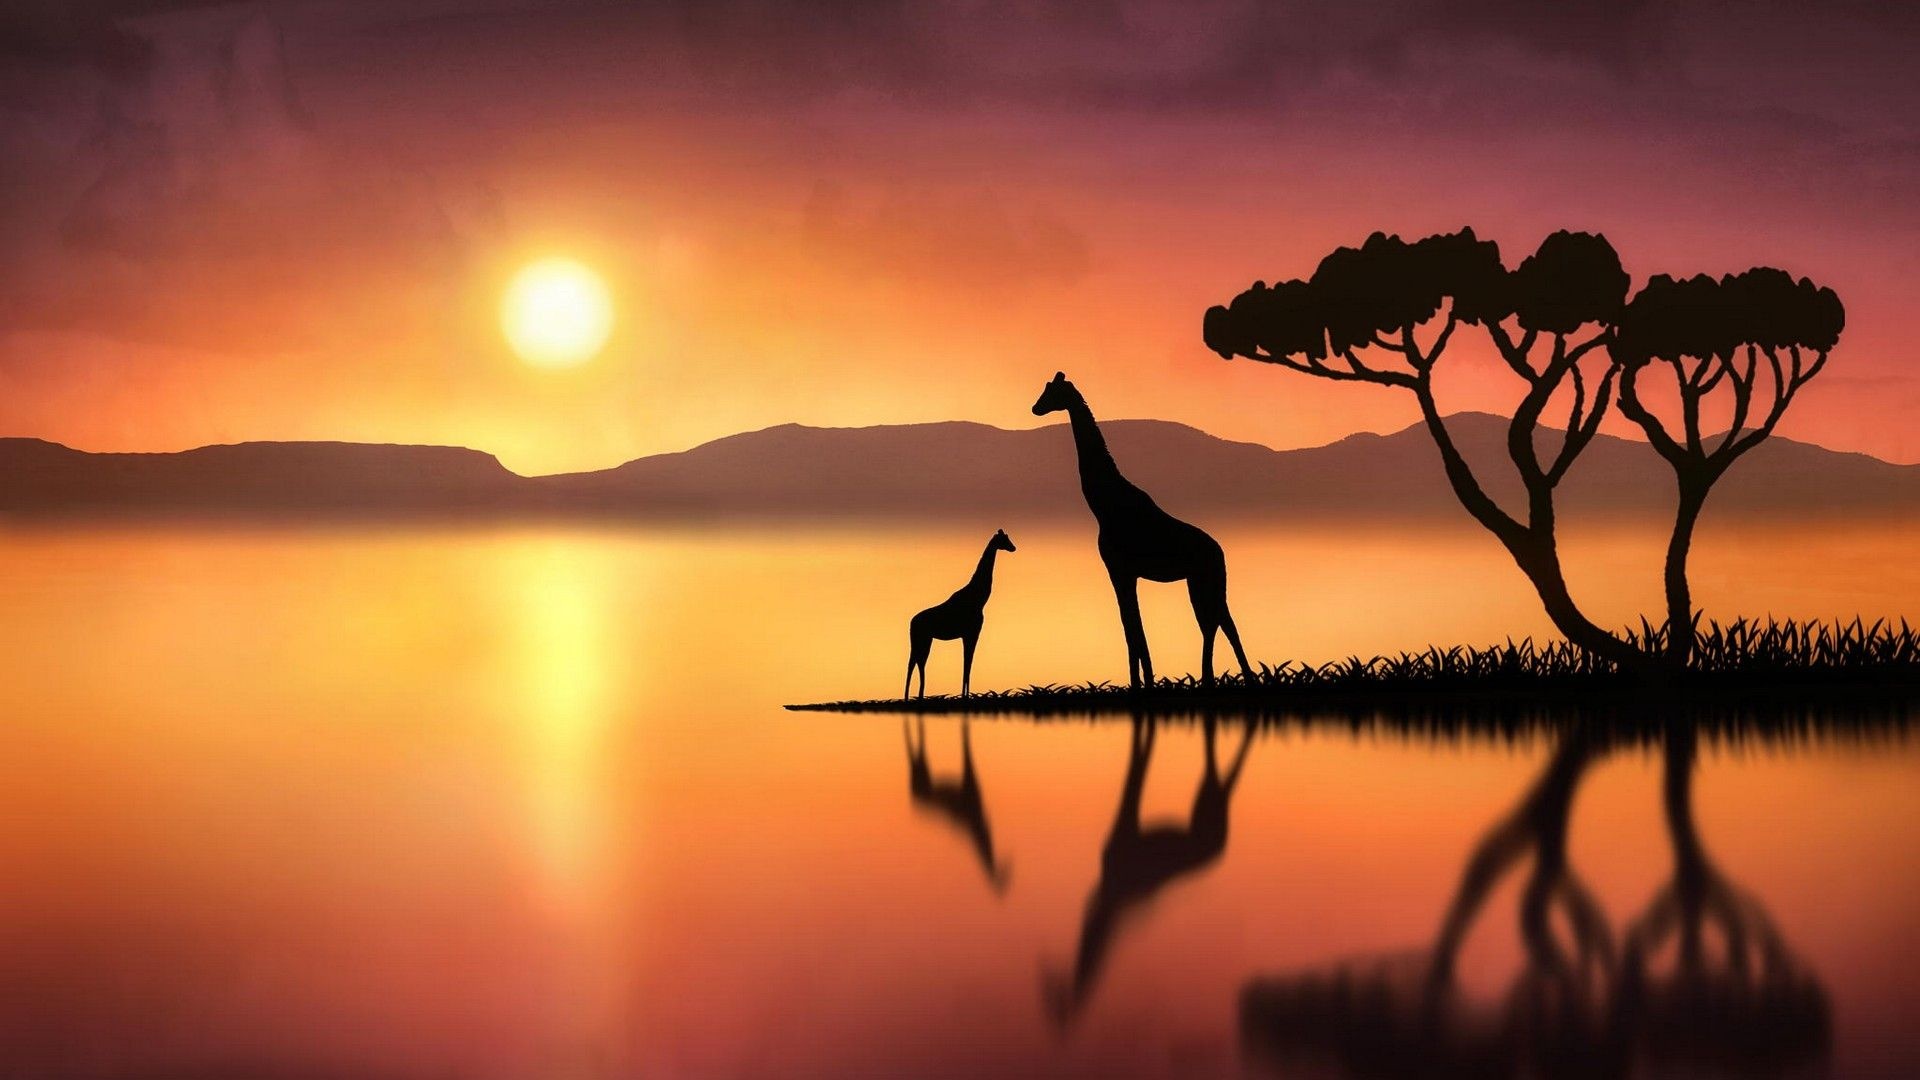 Giraffe: Sleeps only a few hours every day and generally only for short periods at a time. 1920x1080 Full HD Wallpaper.